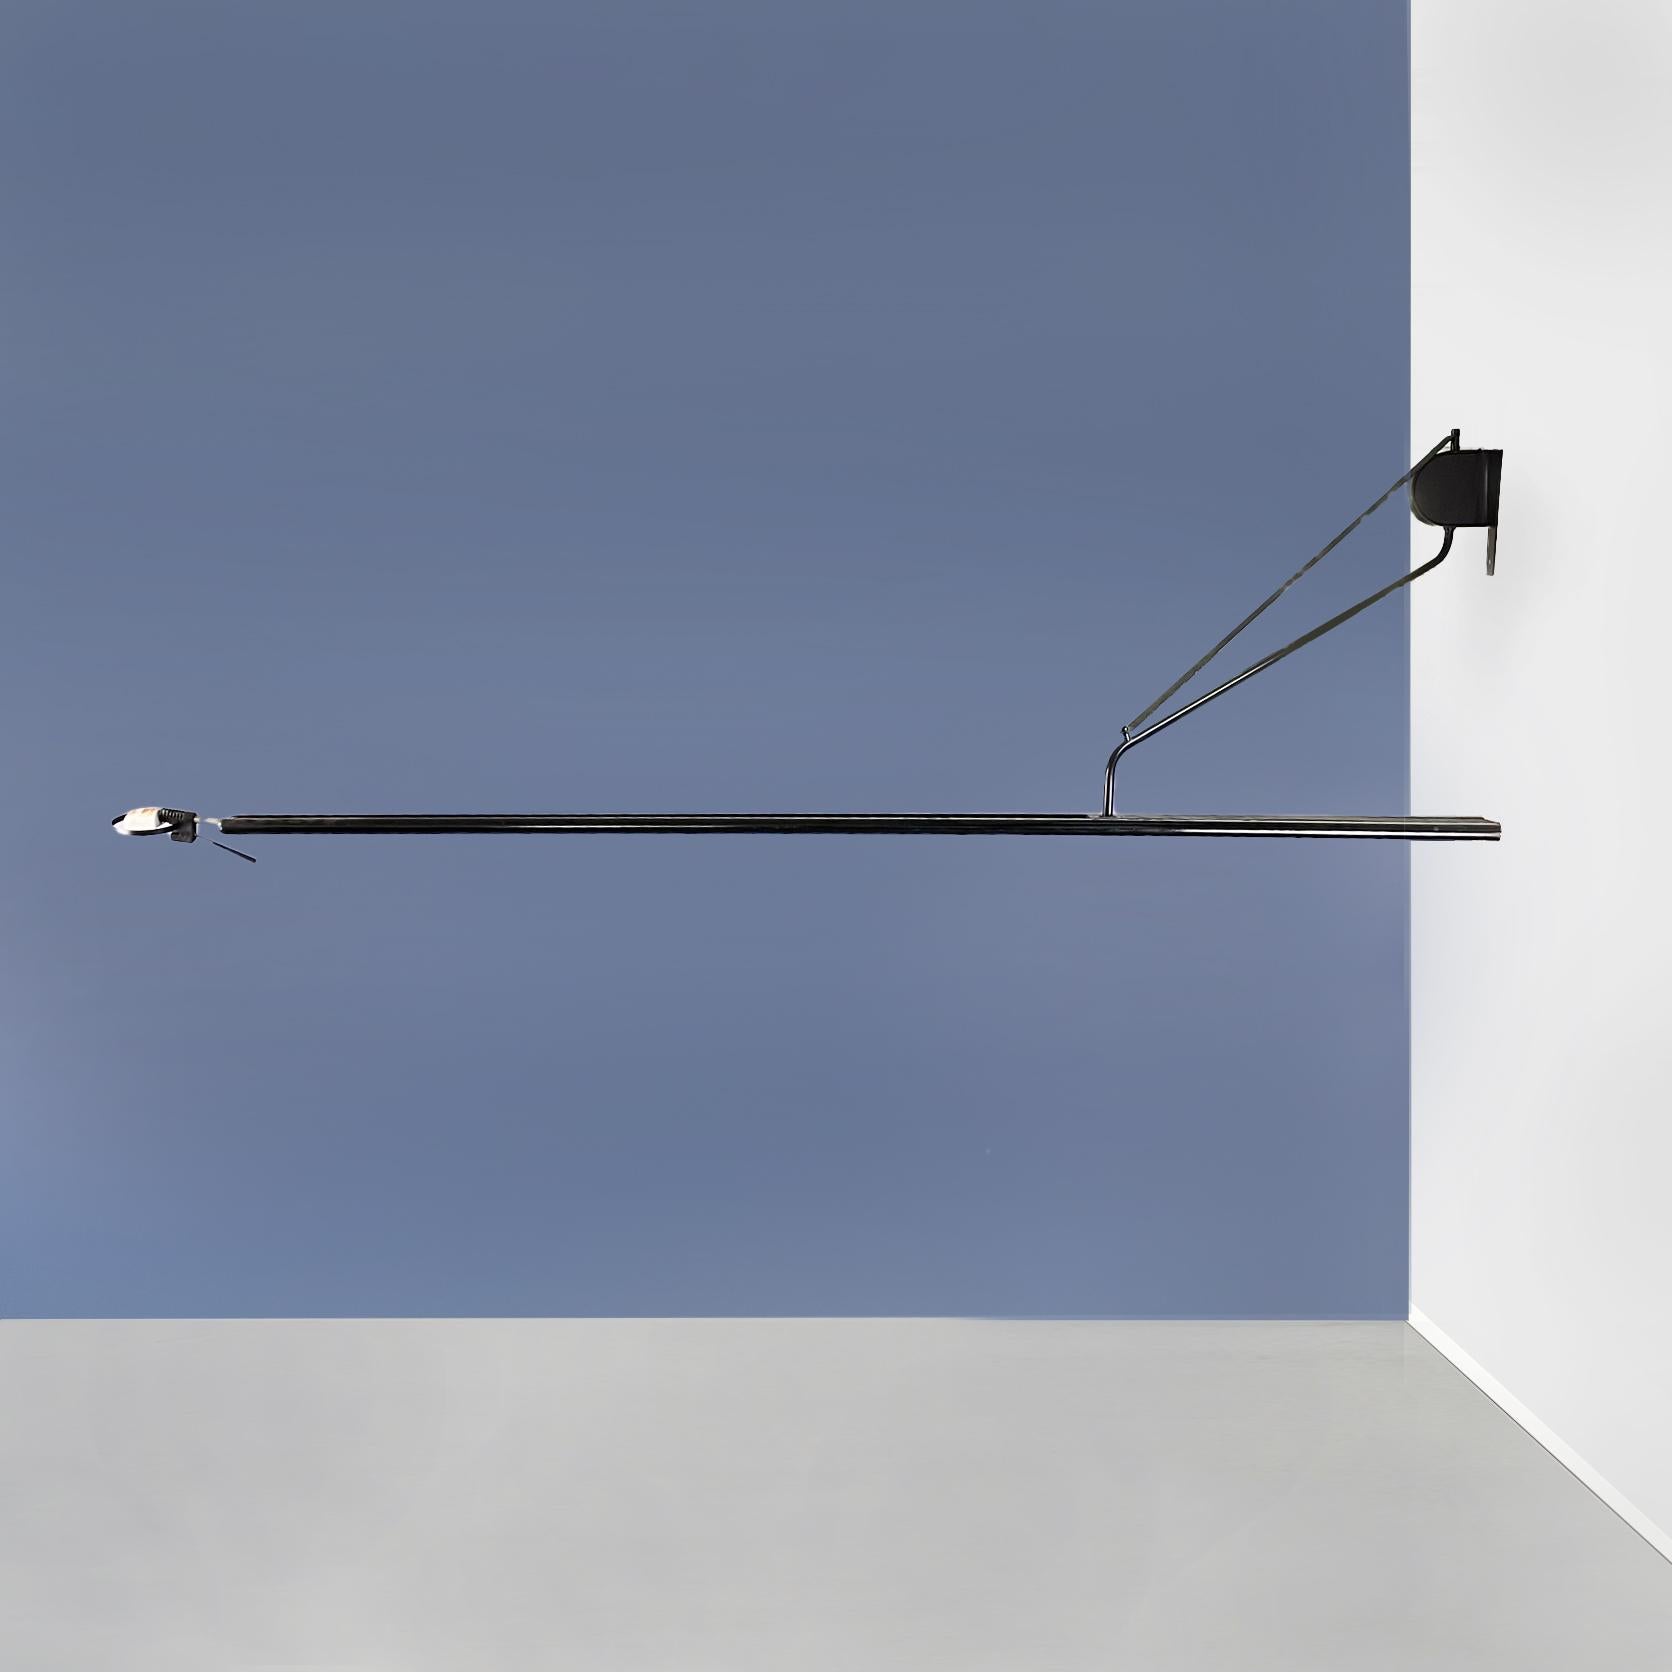 Modern Metal wall lamp Halley by Colombo and Barbaglia for Italiana Luce, 1980s
Wall lamp mod. Halley with adjustable and swivel arm in black painted metal. The structure is composed of two rods and at the end the metal diffuser, totally adjustable.